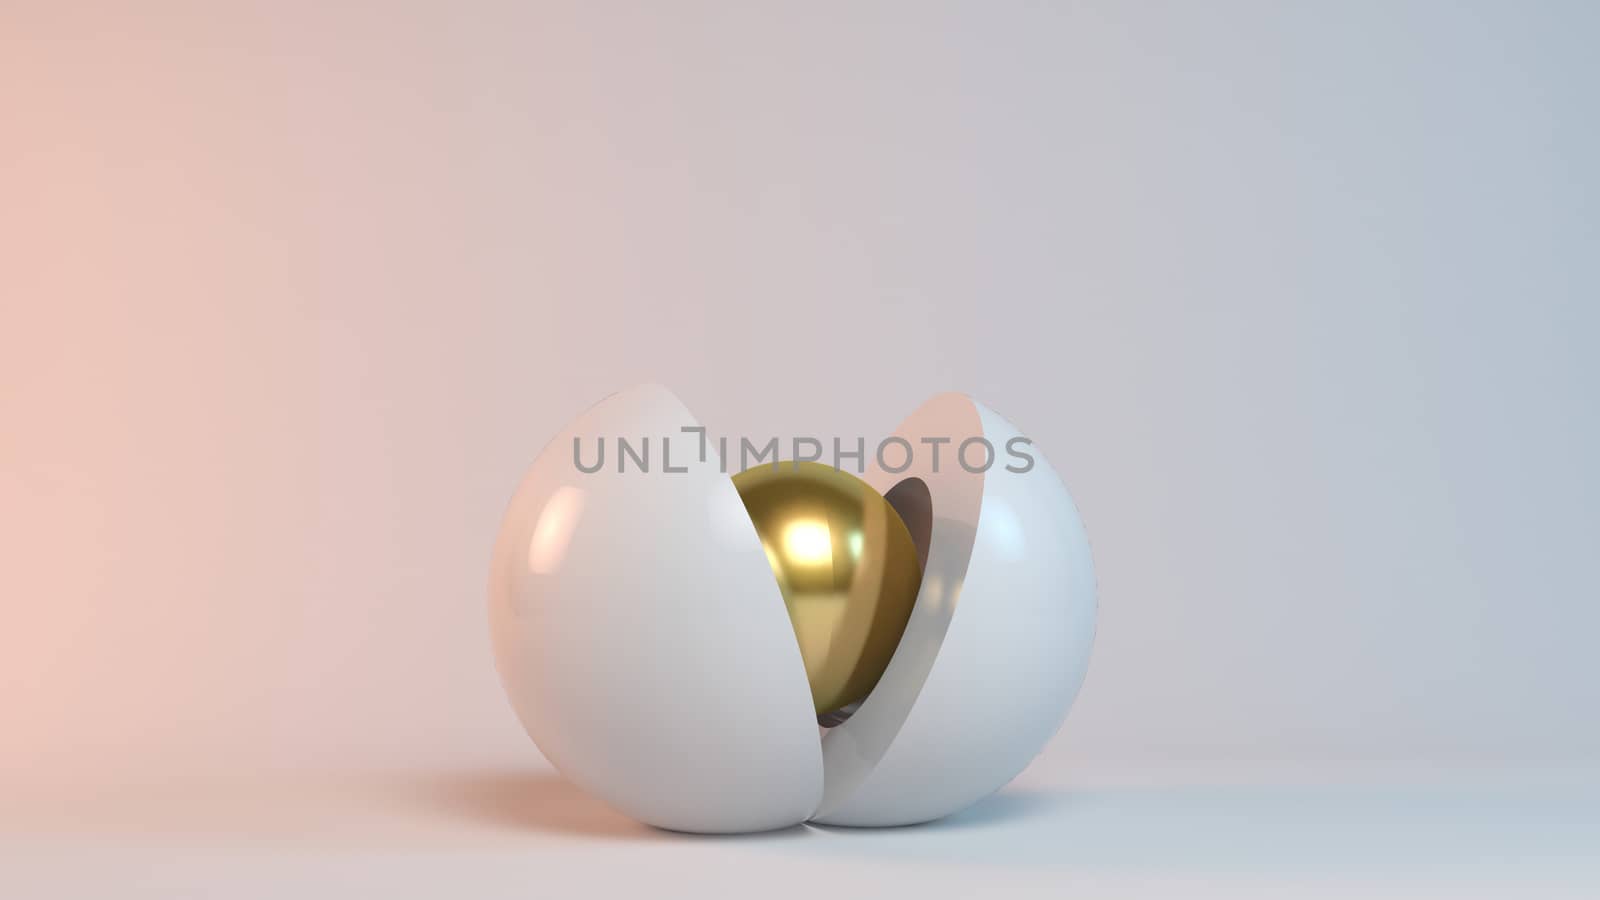 Business concept illustration, a 3d golden sphere is born from another sphere